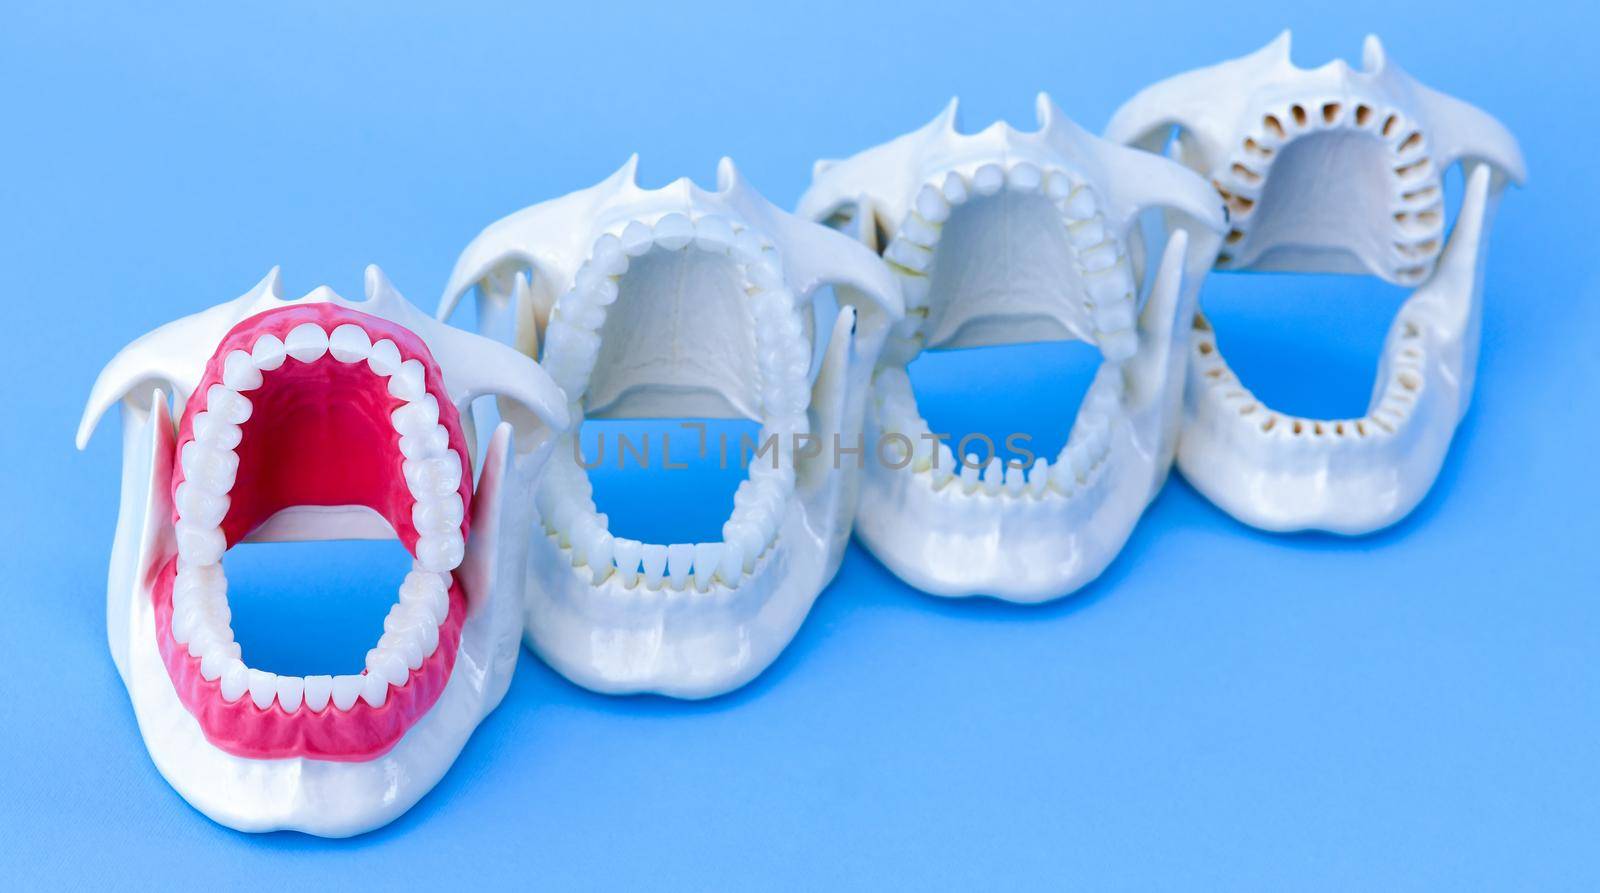 Dentist orthodontic teeth models with jaws opened on blue background